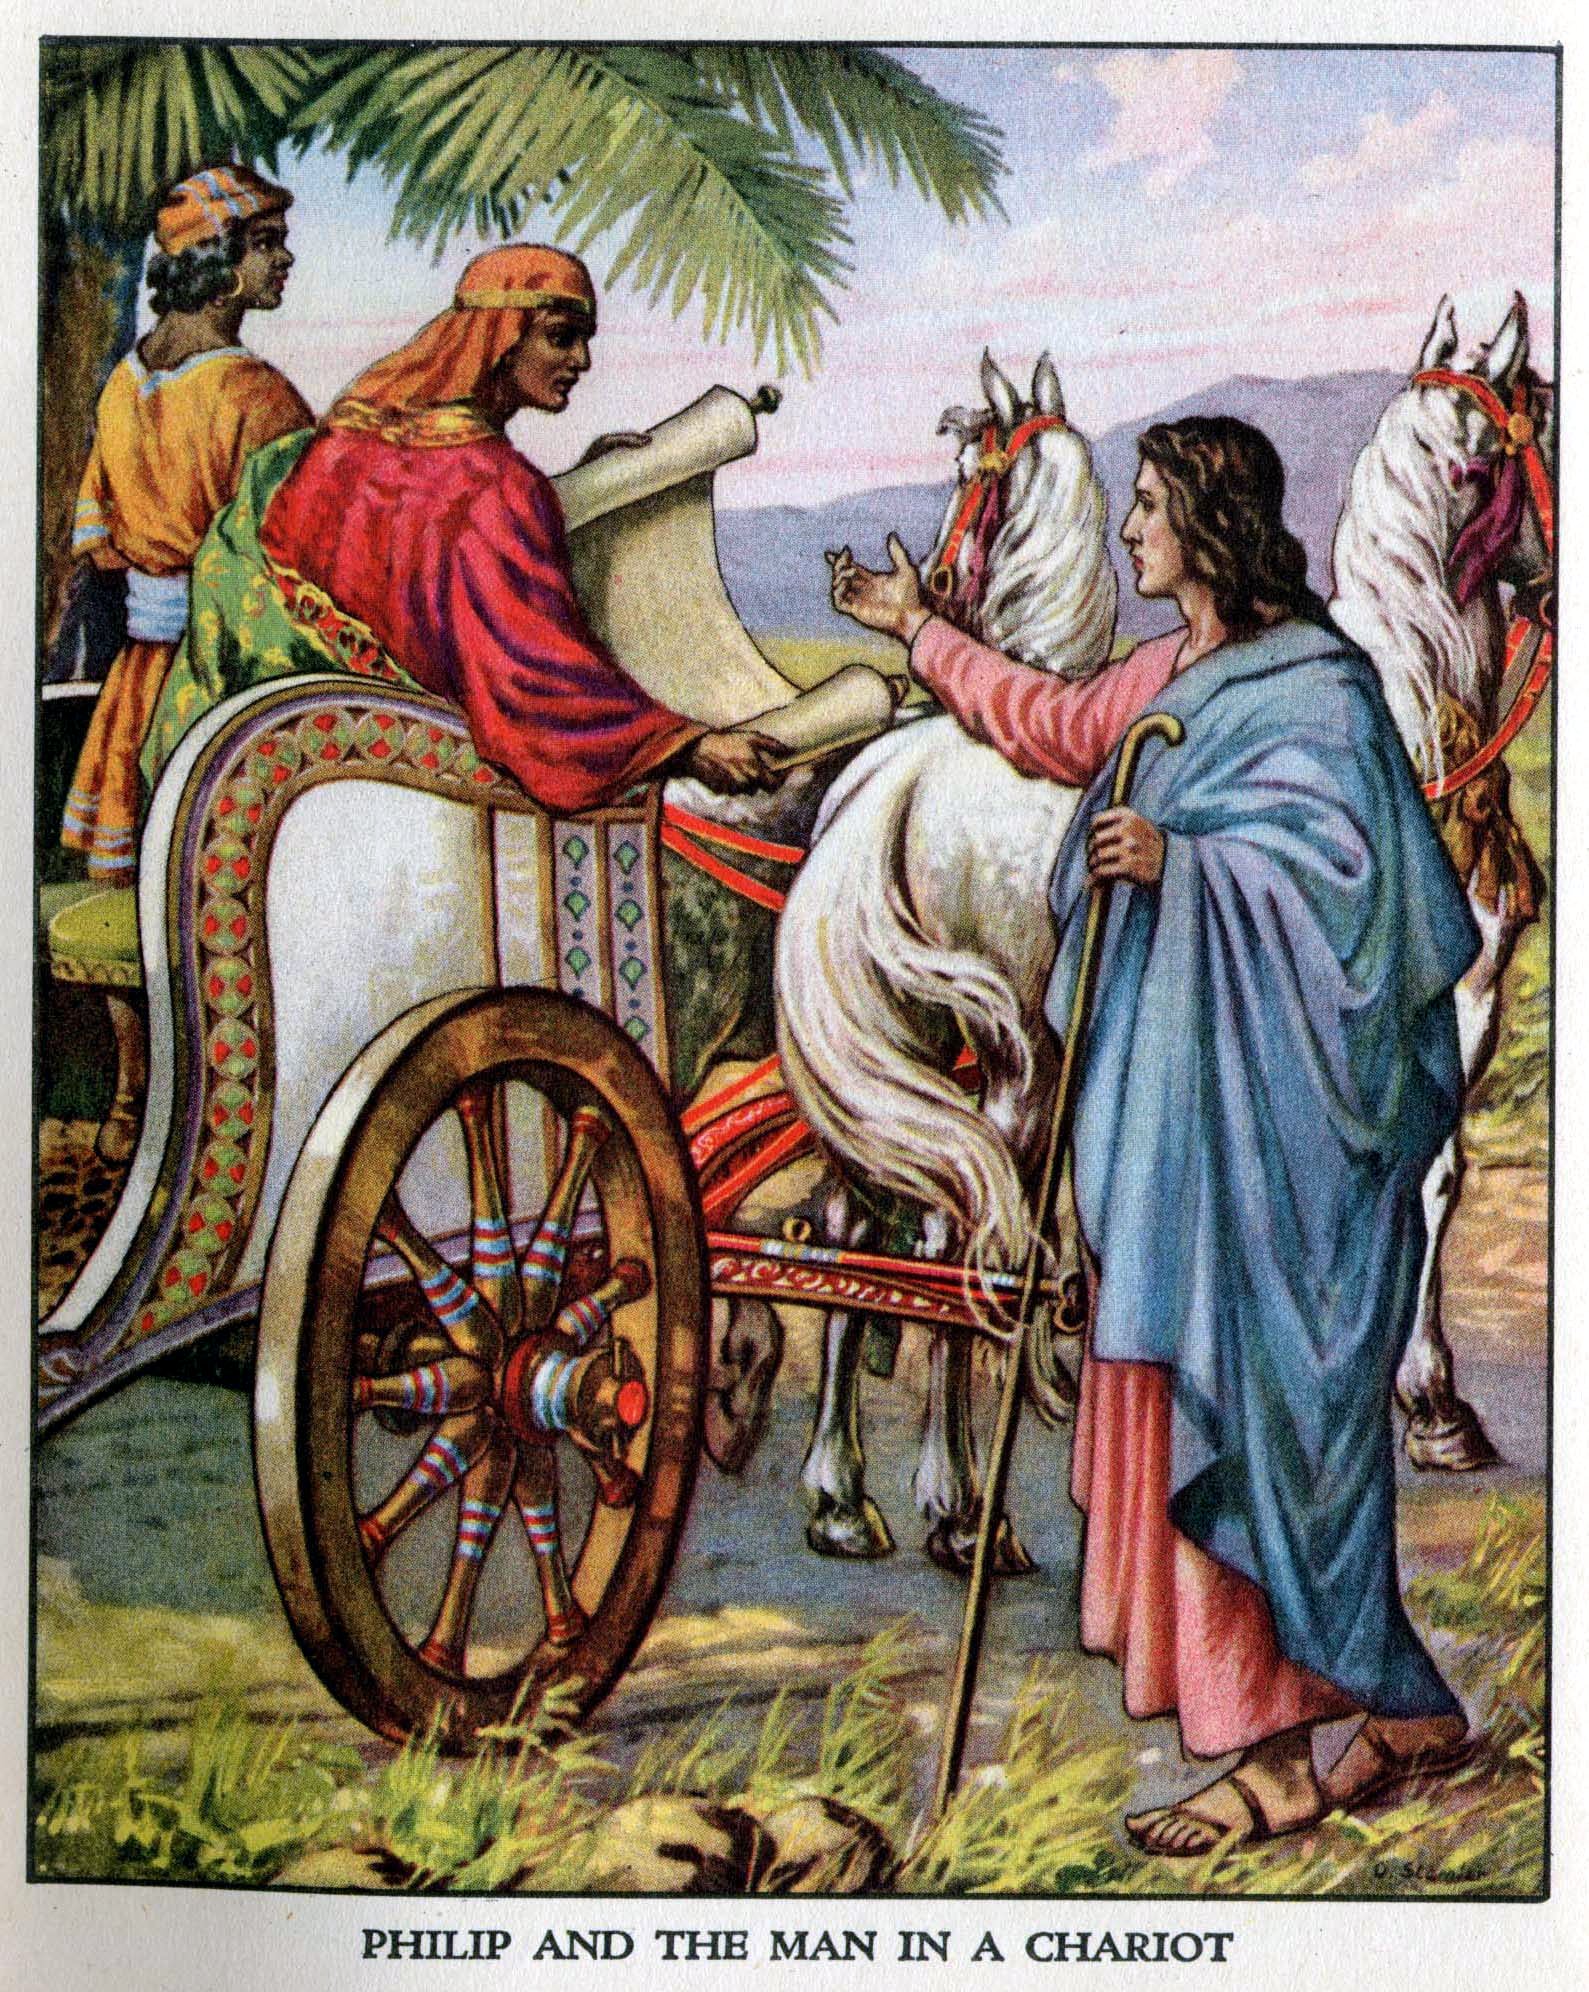 Philip and the Man in the Chariot